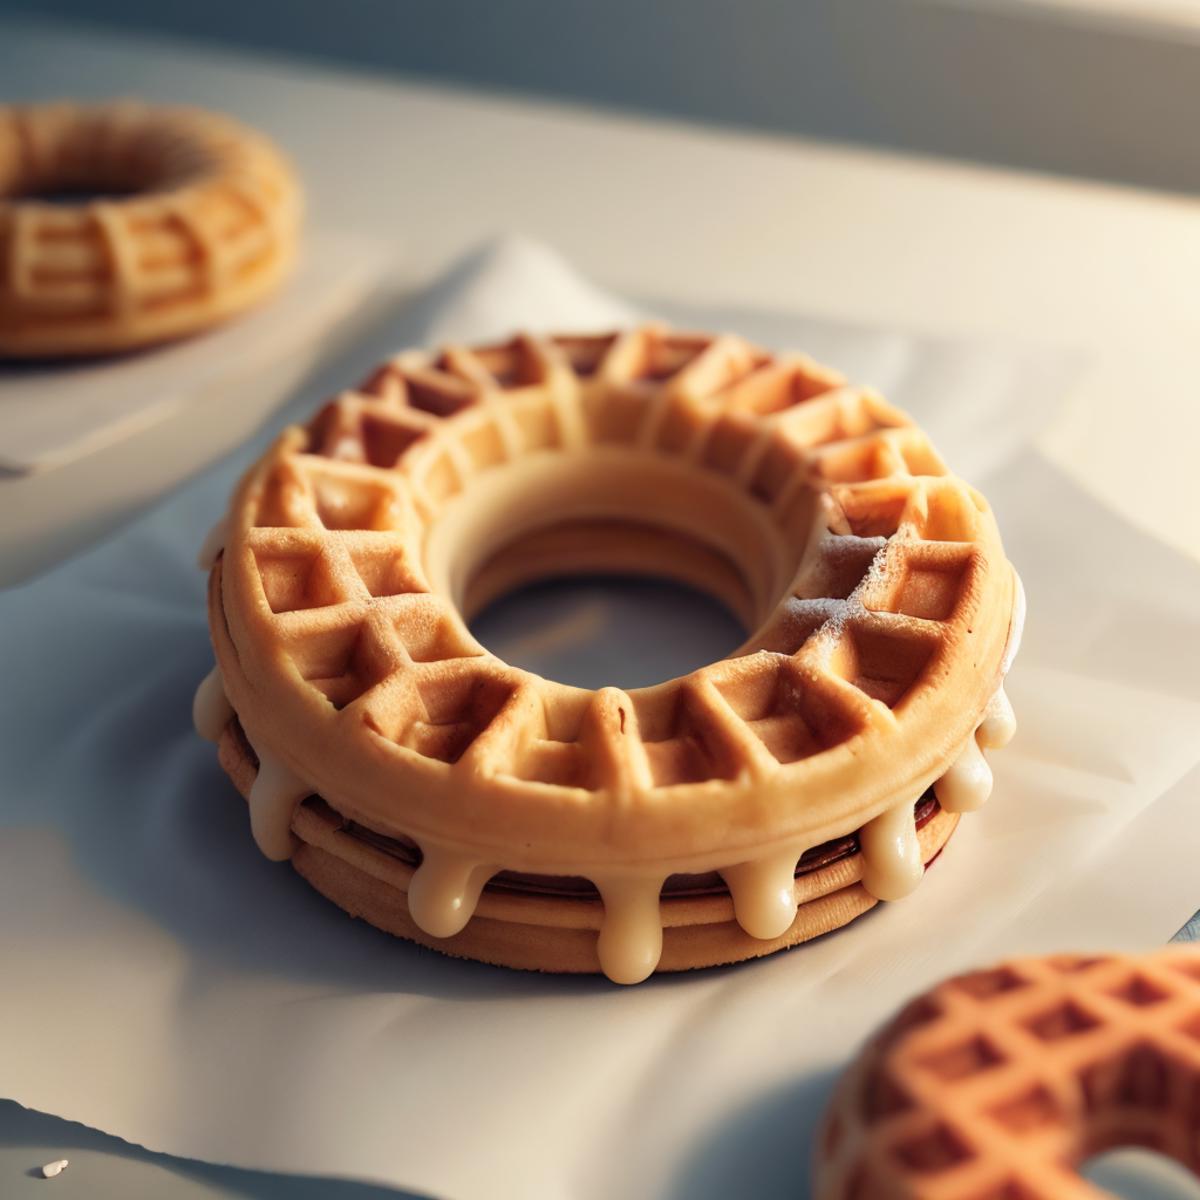 WaffleStyle - Turn anything into a waffle! image by mnemic